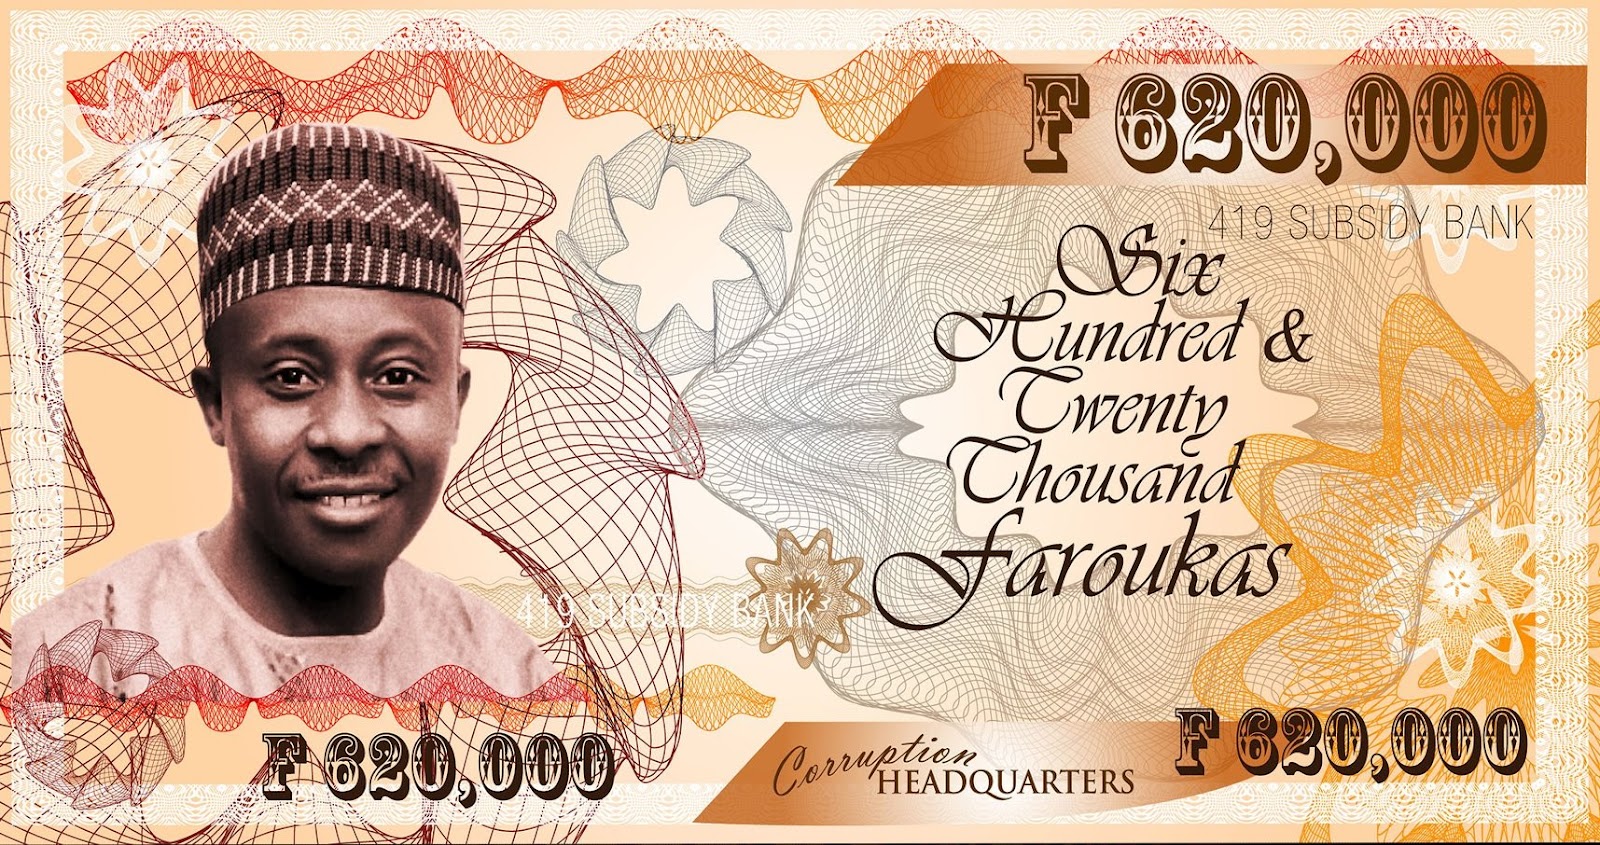 Nigeria's currency Note.